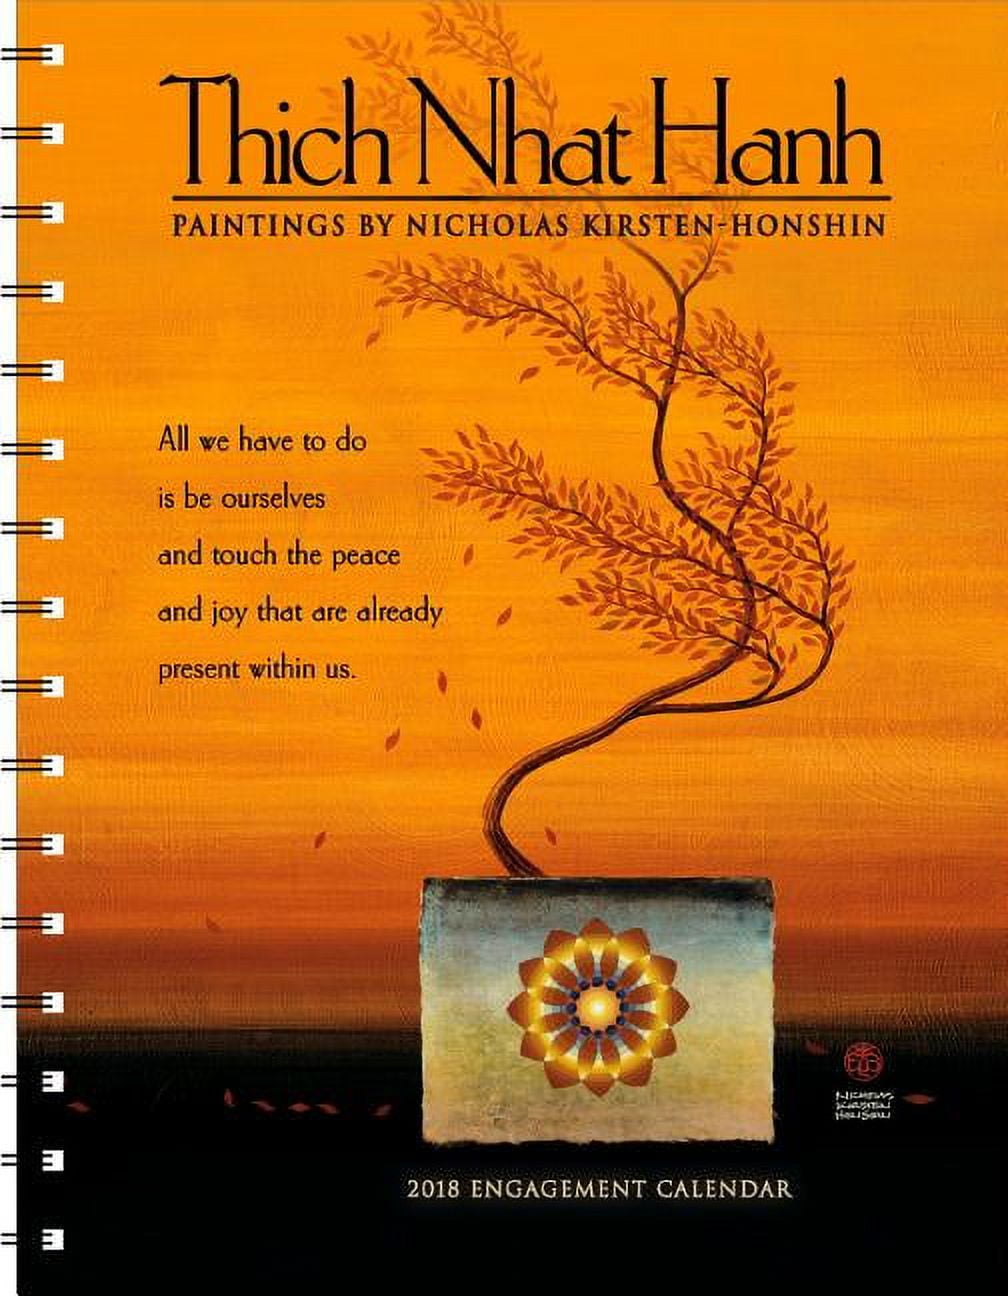 thich-nhat-hanh-2018-engagement-calendar-paintings-by-nicholas-kirsten-honshin-other